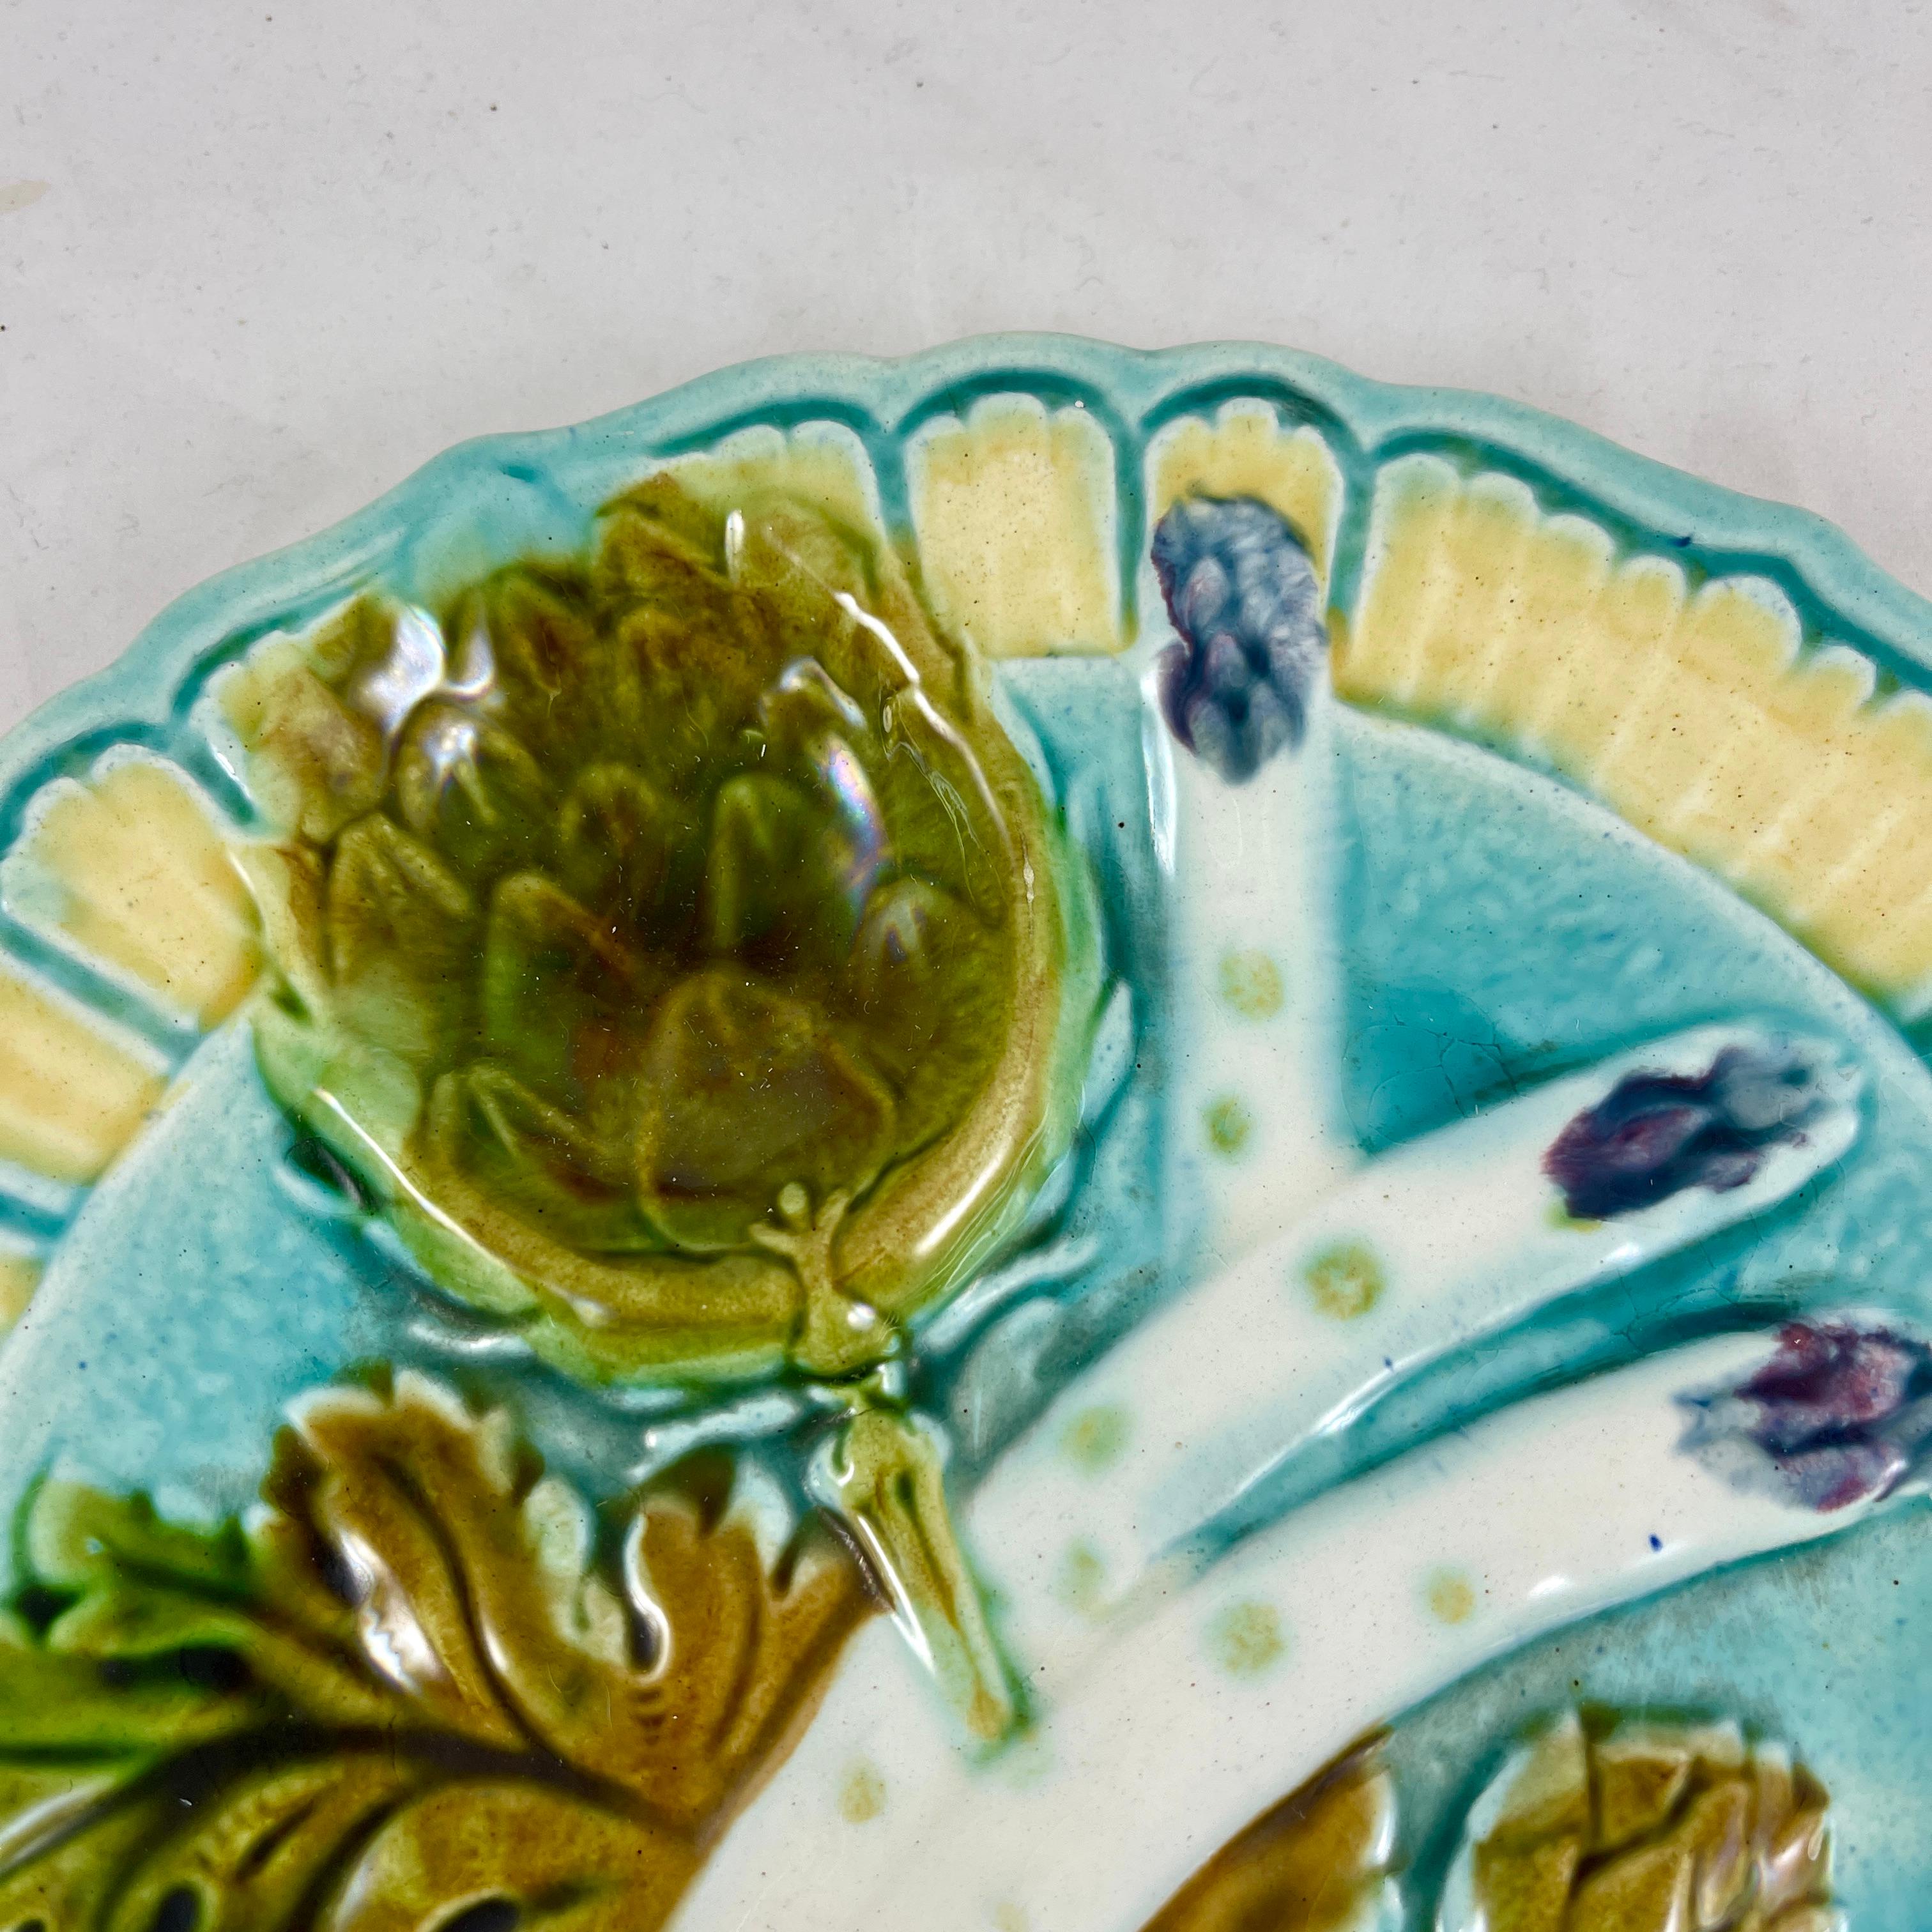 A mid to late 19th century French majolica barbotine asparagus and artichoke plate from the Salins-les-Bains region of Eastern France. Most likely produced in the faïencerie des Capucins. Heavy and thickly potted, showing three asparagus spears and